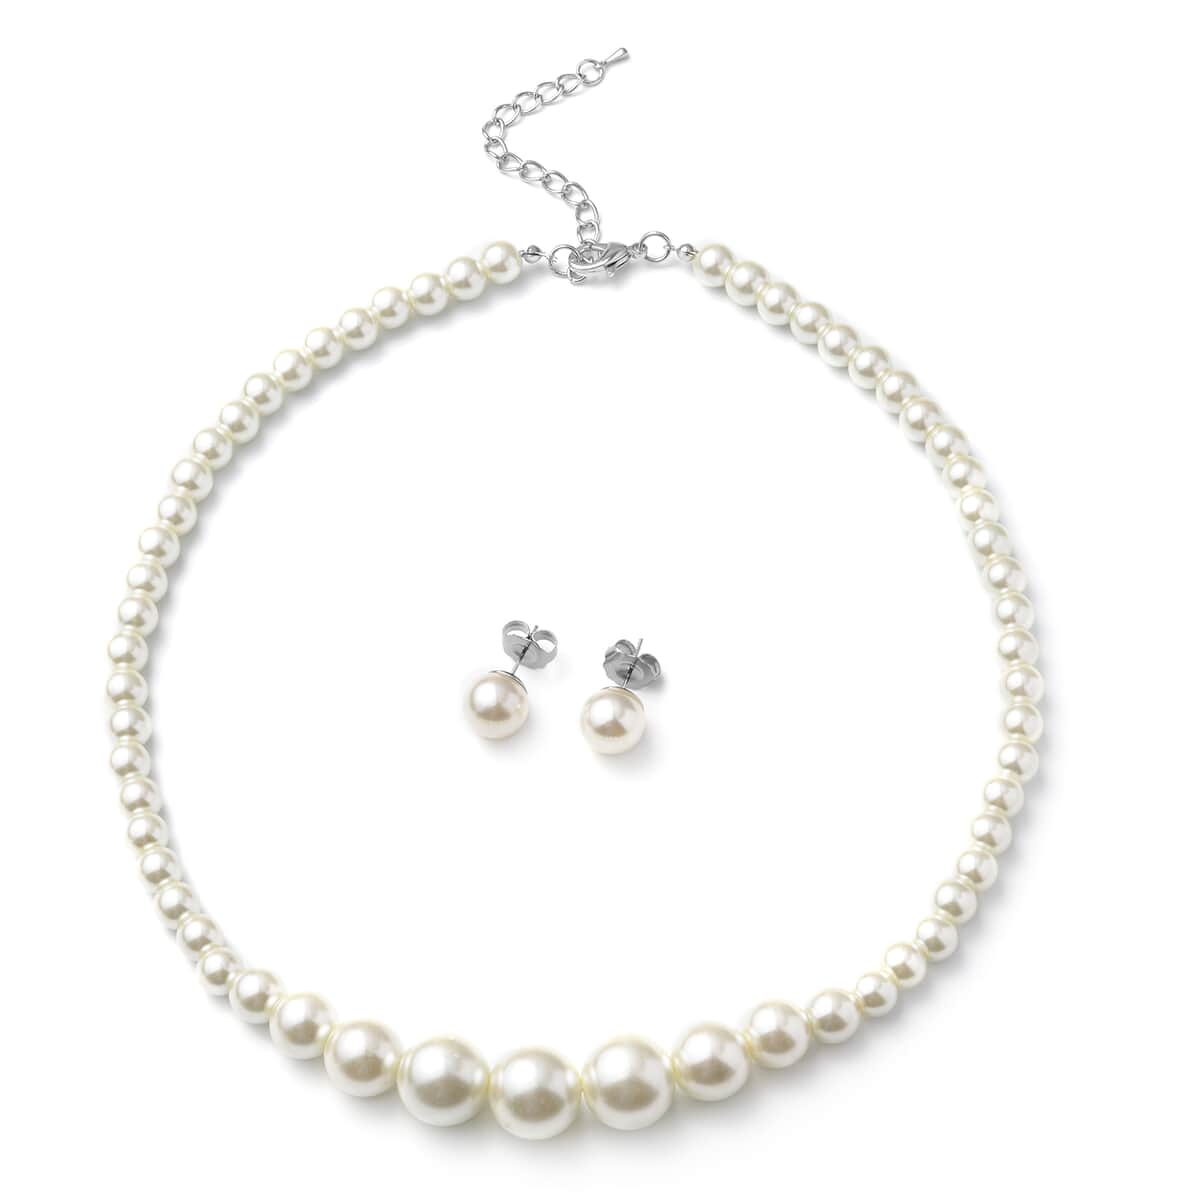 Set of 2 Simulated White Pearl Necklace 20-22 Inches and Earrings in Silvertone and Stainless Steel image number 0